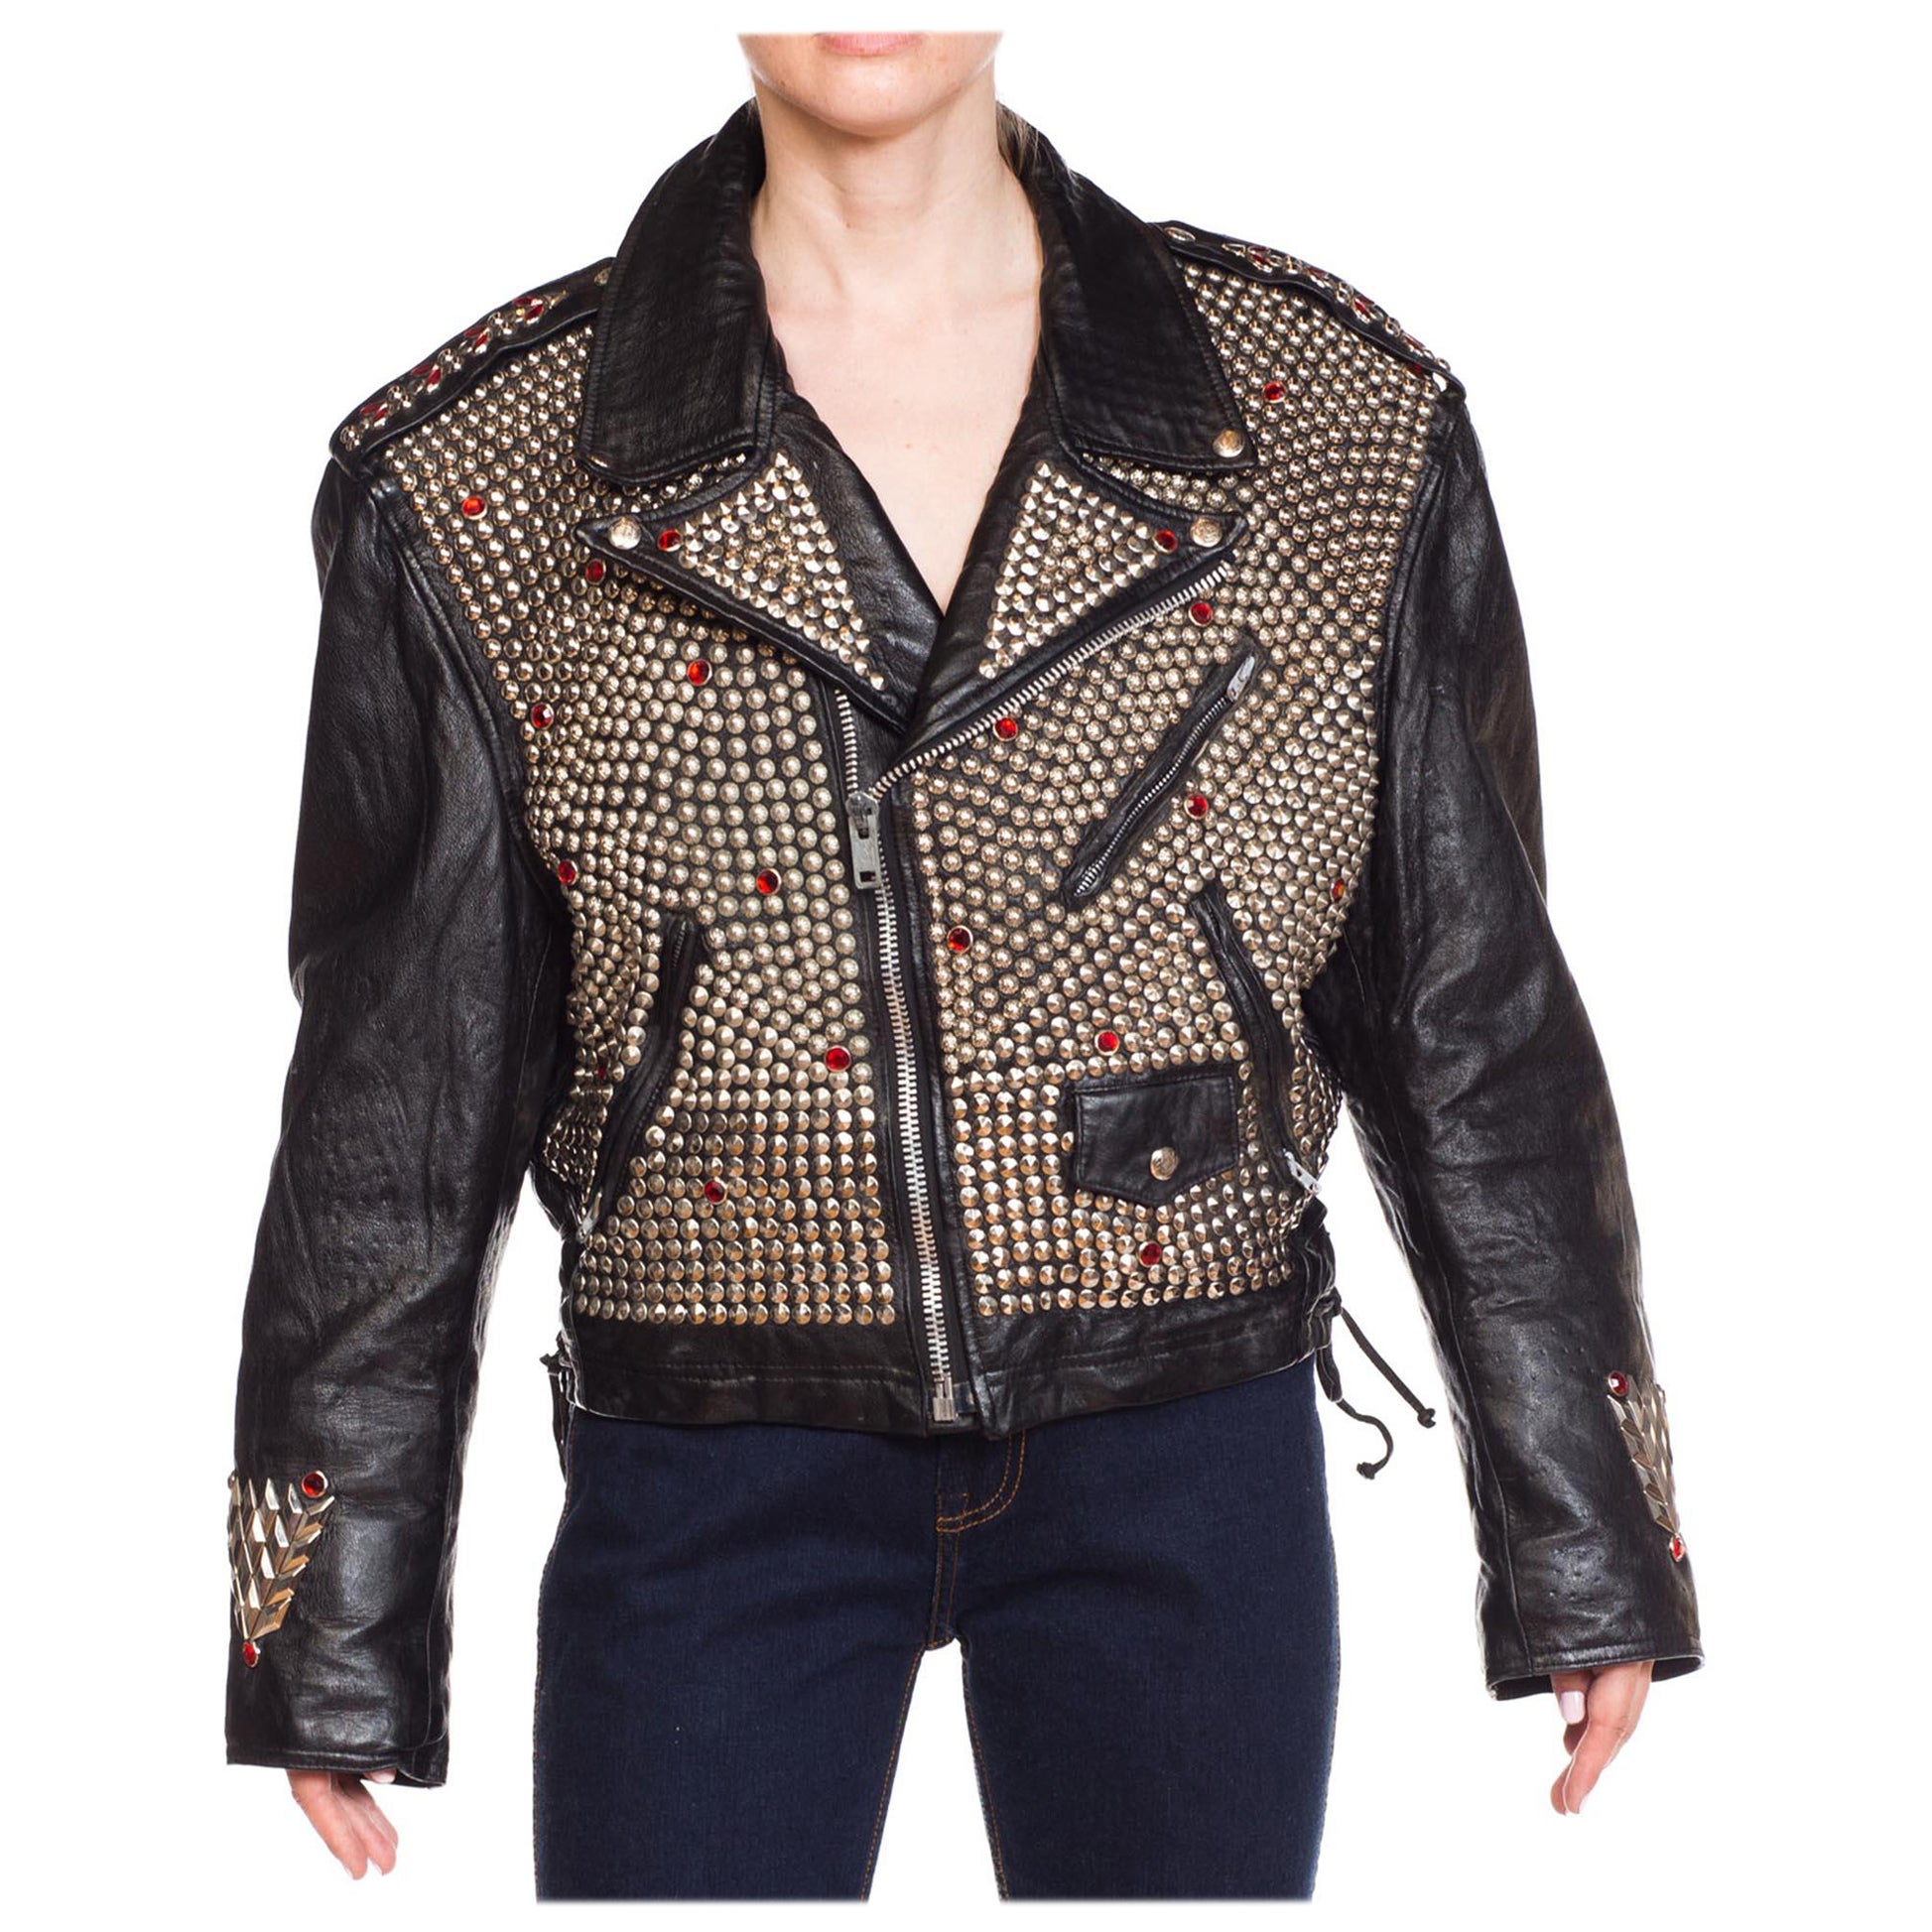 1990S JEFF HAMILTON Men's Studded Leather Biker Jacket With Crystals And Eagle